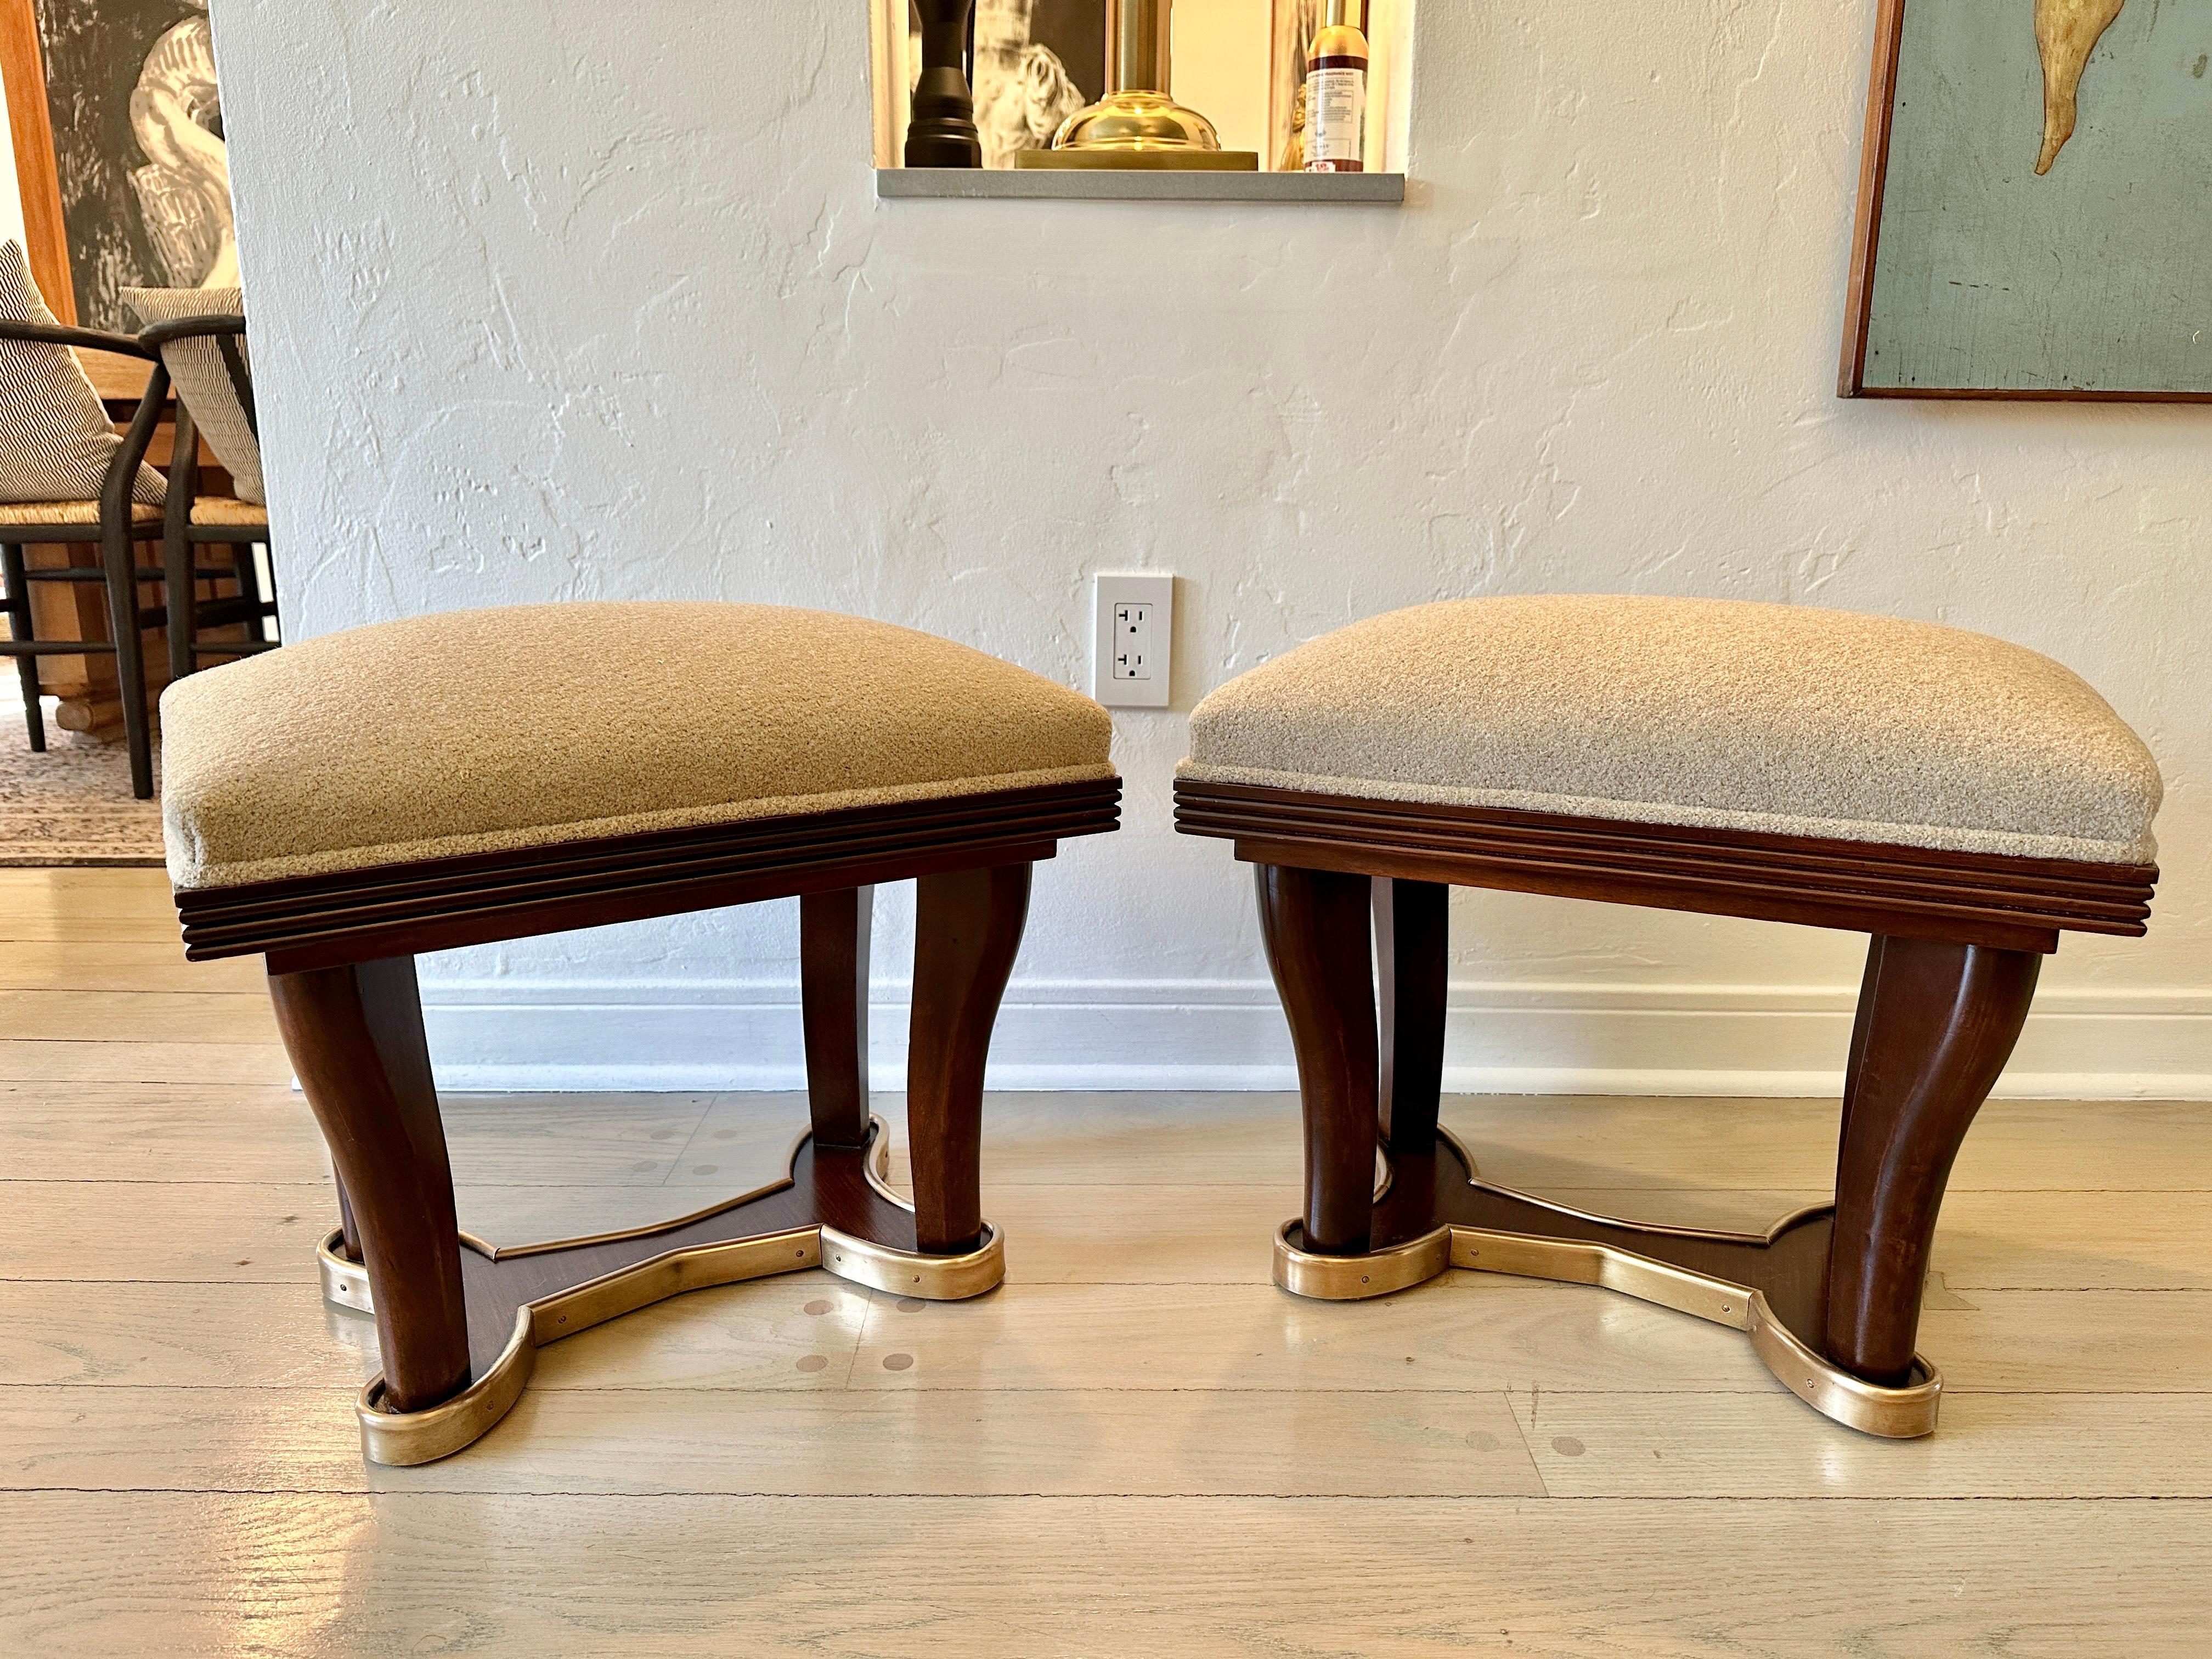 Reupholstered in a luxurious cashmere/wool blend fabric in camel tone, these Art Deco benches feature channel wood trim to top edge and a brass wrapped base. Phenomenal style and elegance!.